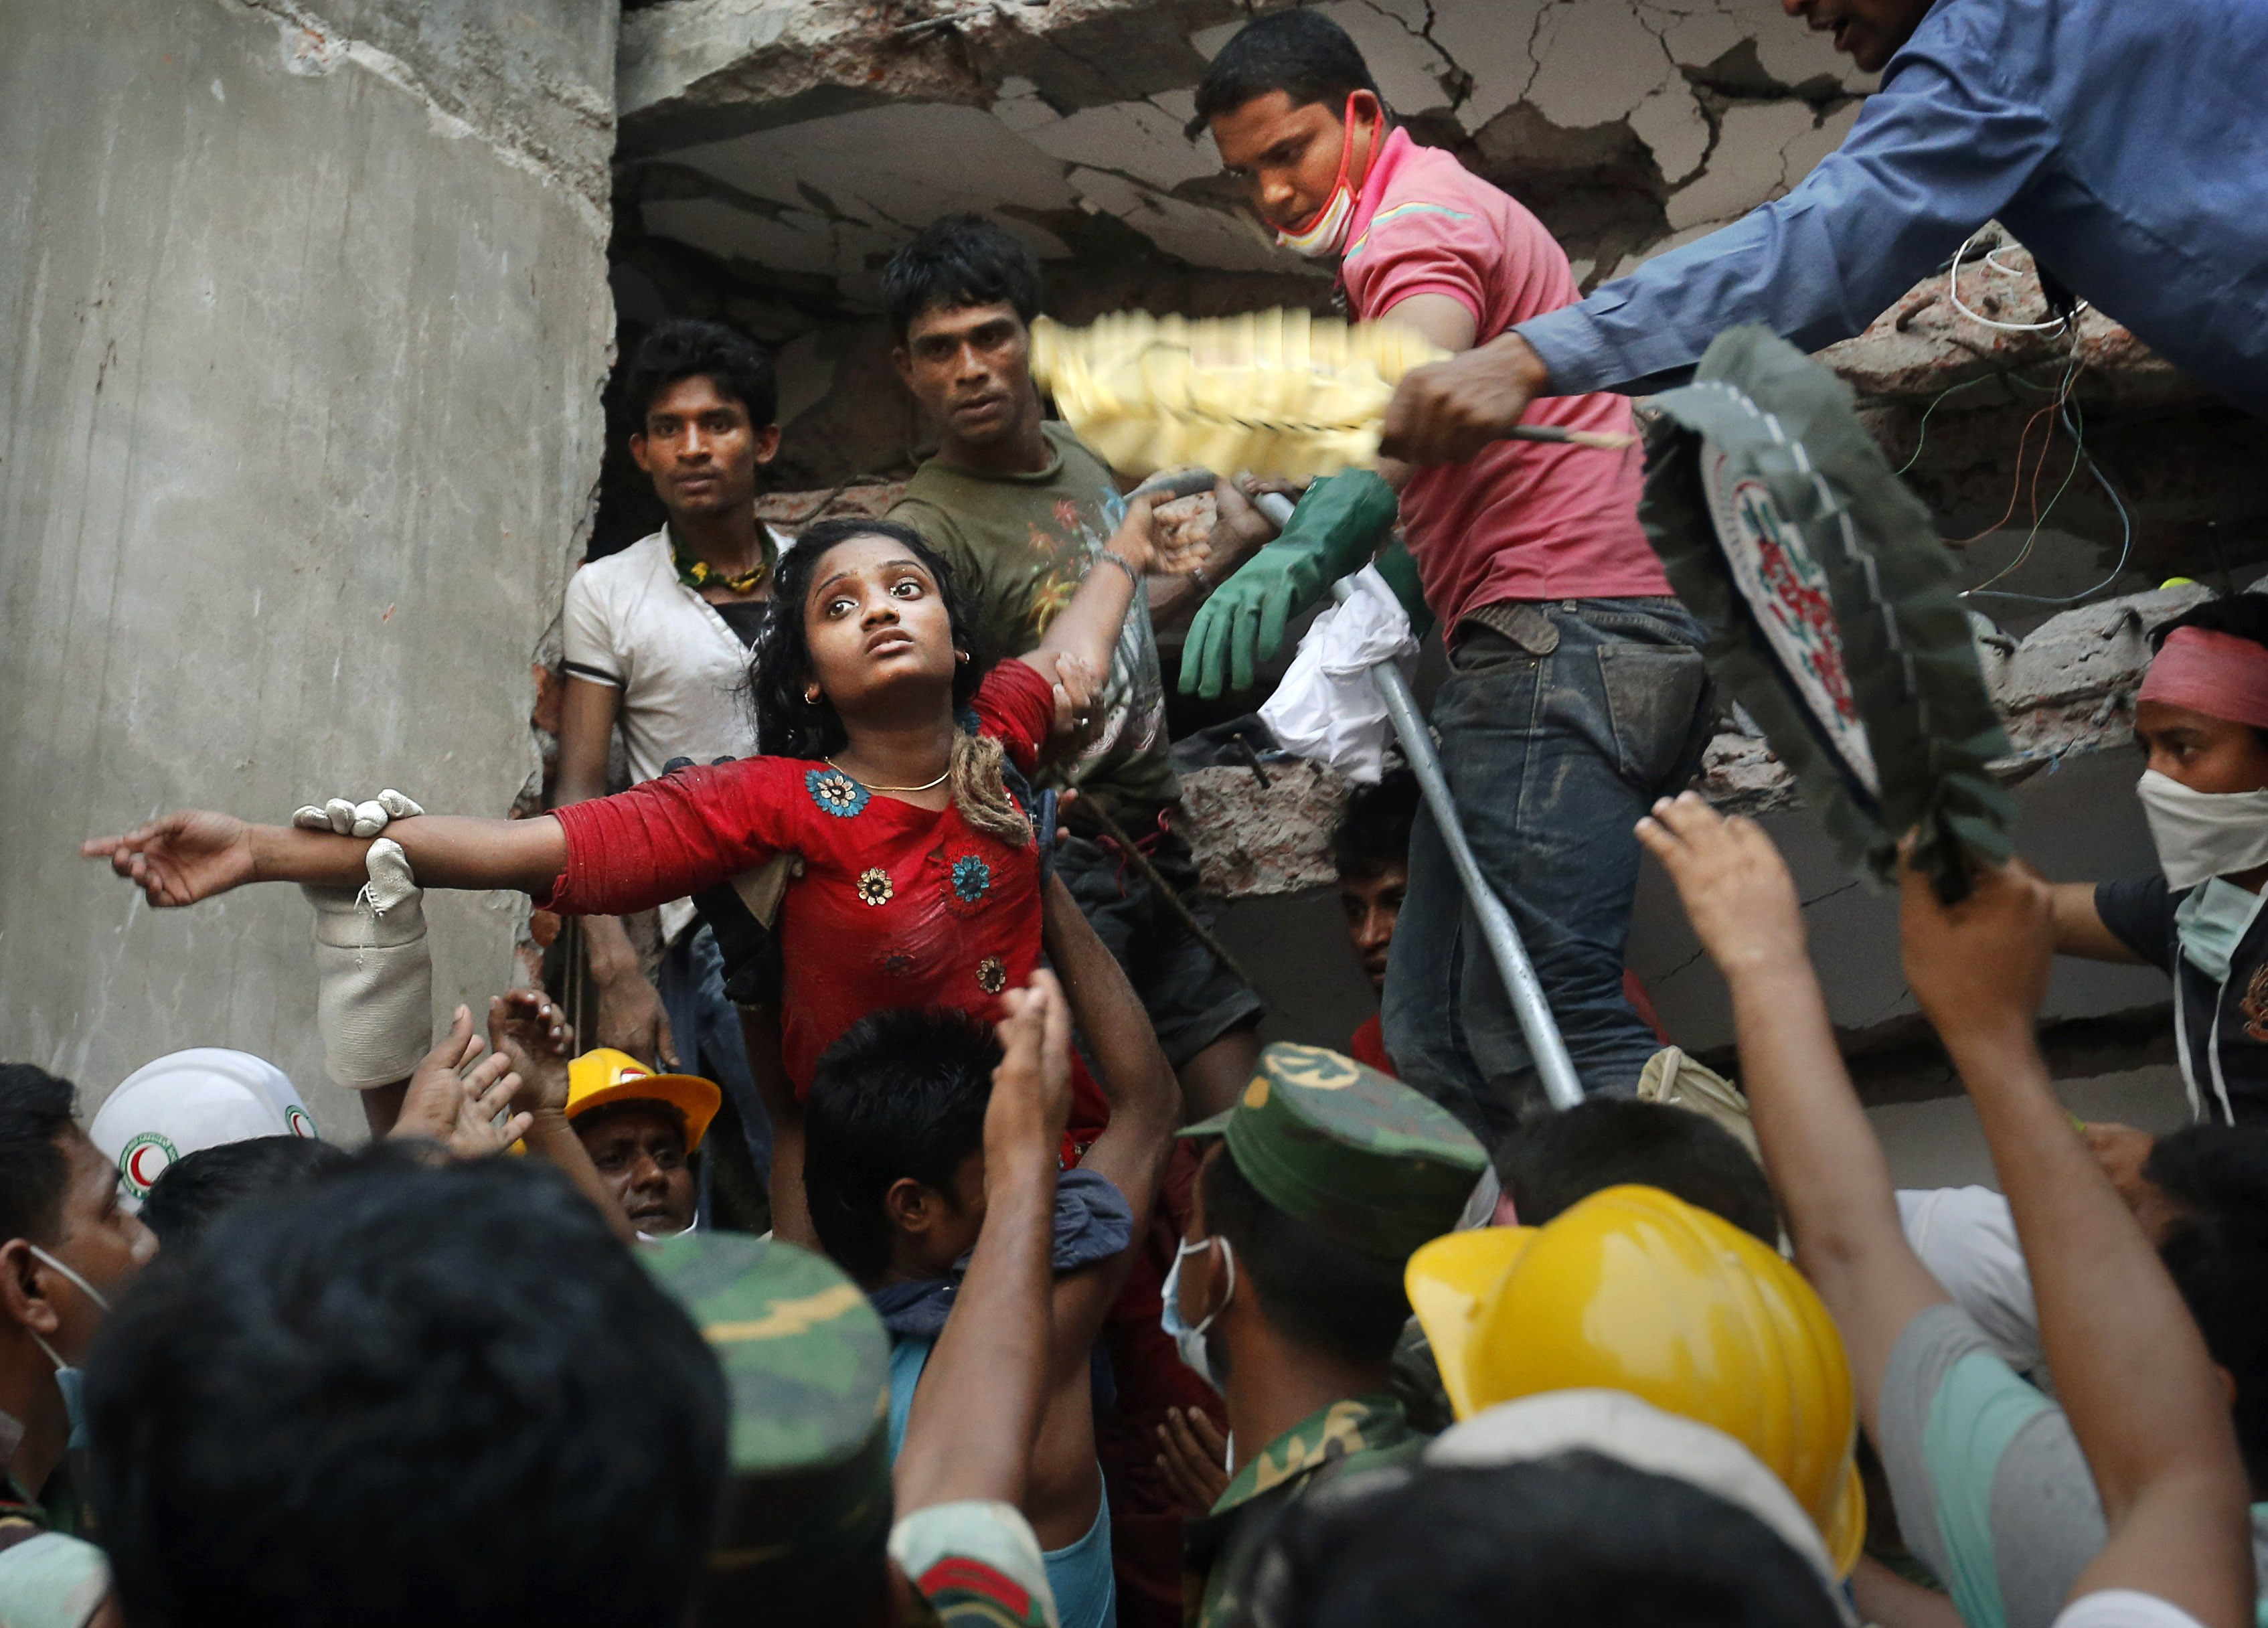 A Bangladeshi woman is lifted out of the rubble by rescuers at the site of the Rana Plaza building that collapsed in Savar, near Dhaka, Bangladesh, on April 25, 2013. Photo: AP